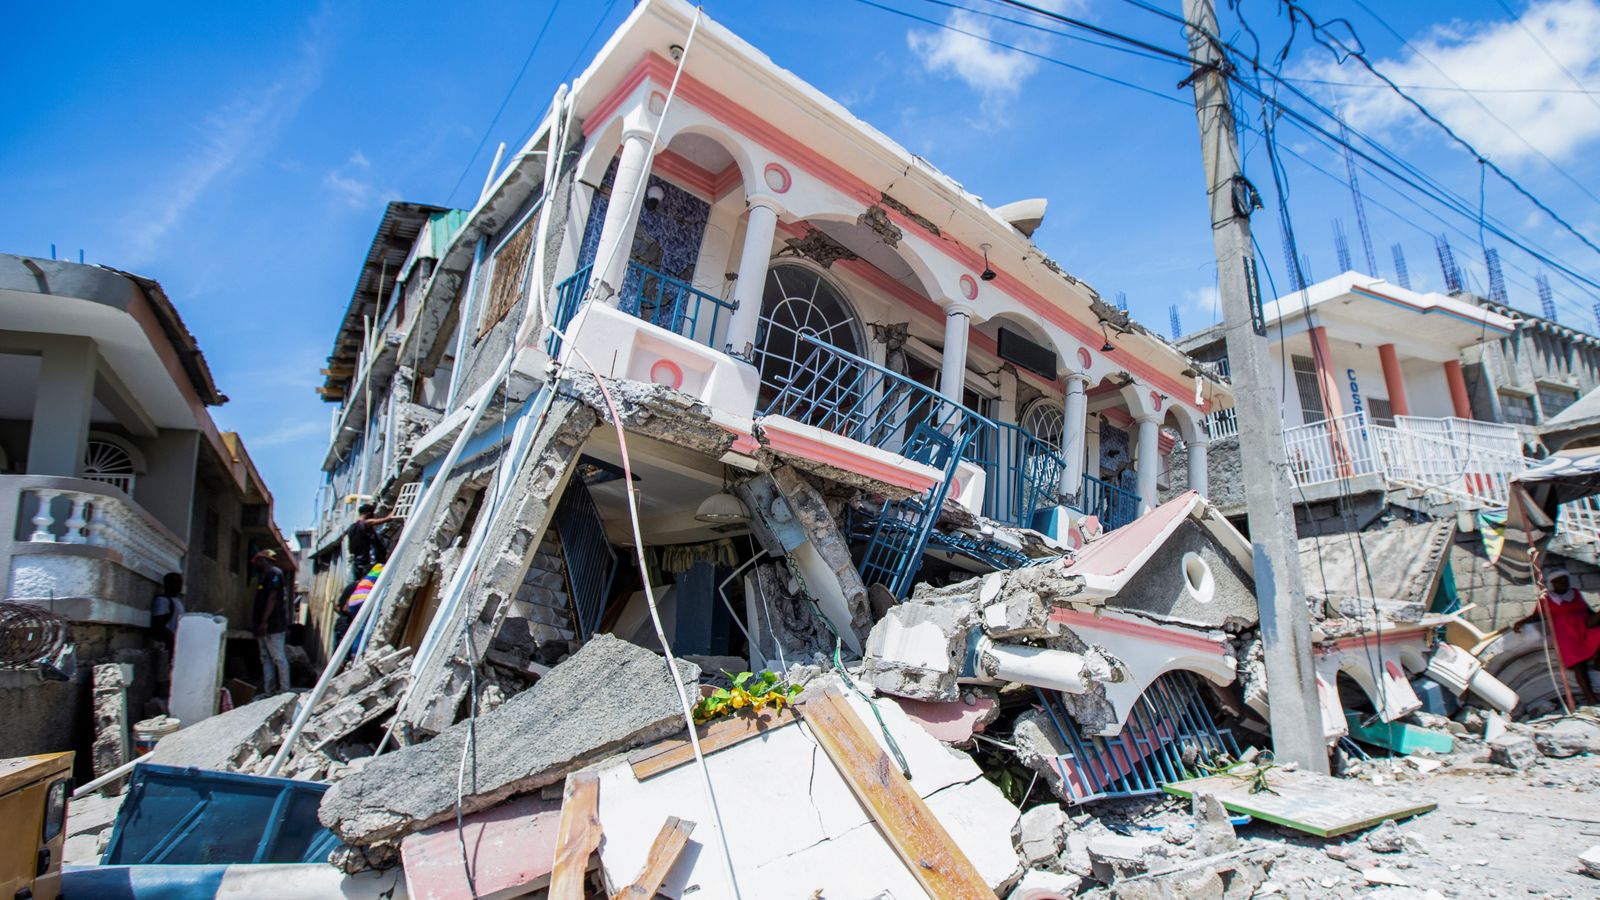 Haiti earthquake Towns destroyed and hospitals overwhelmed, with